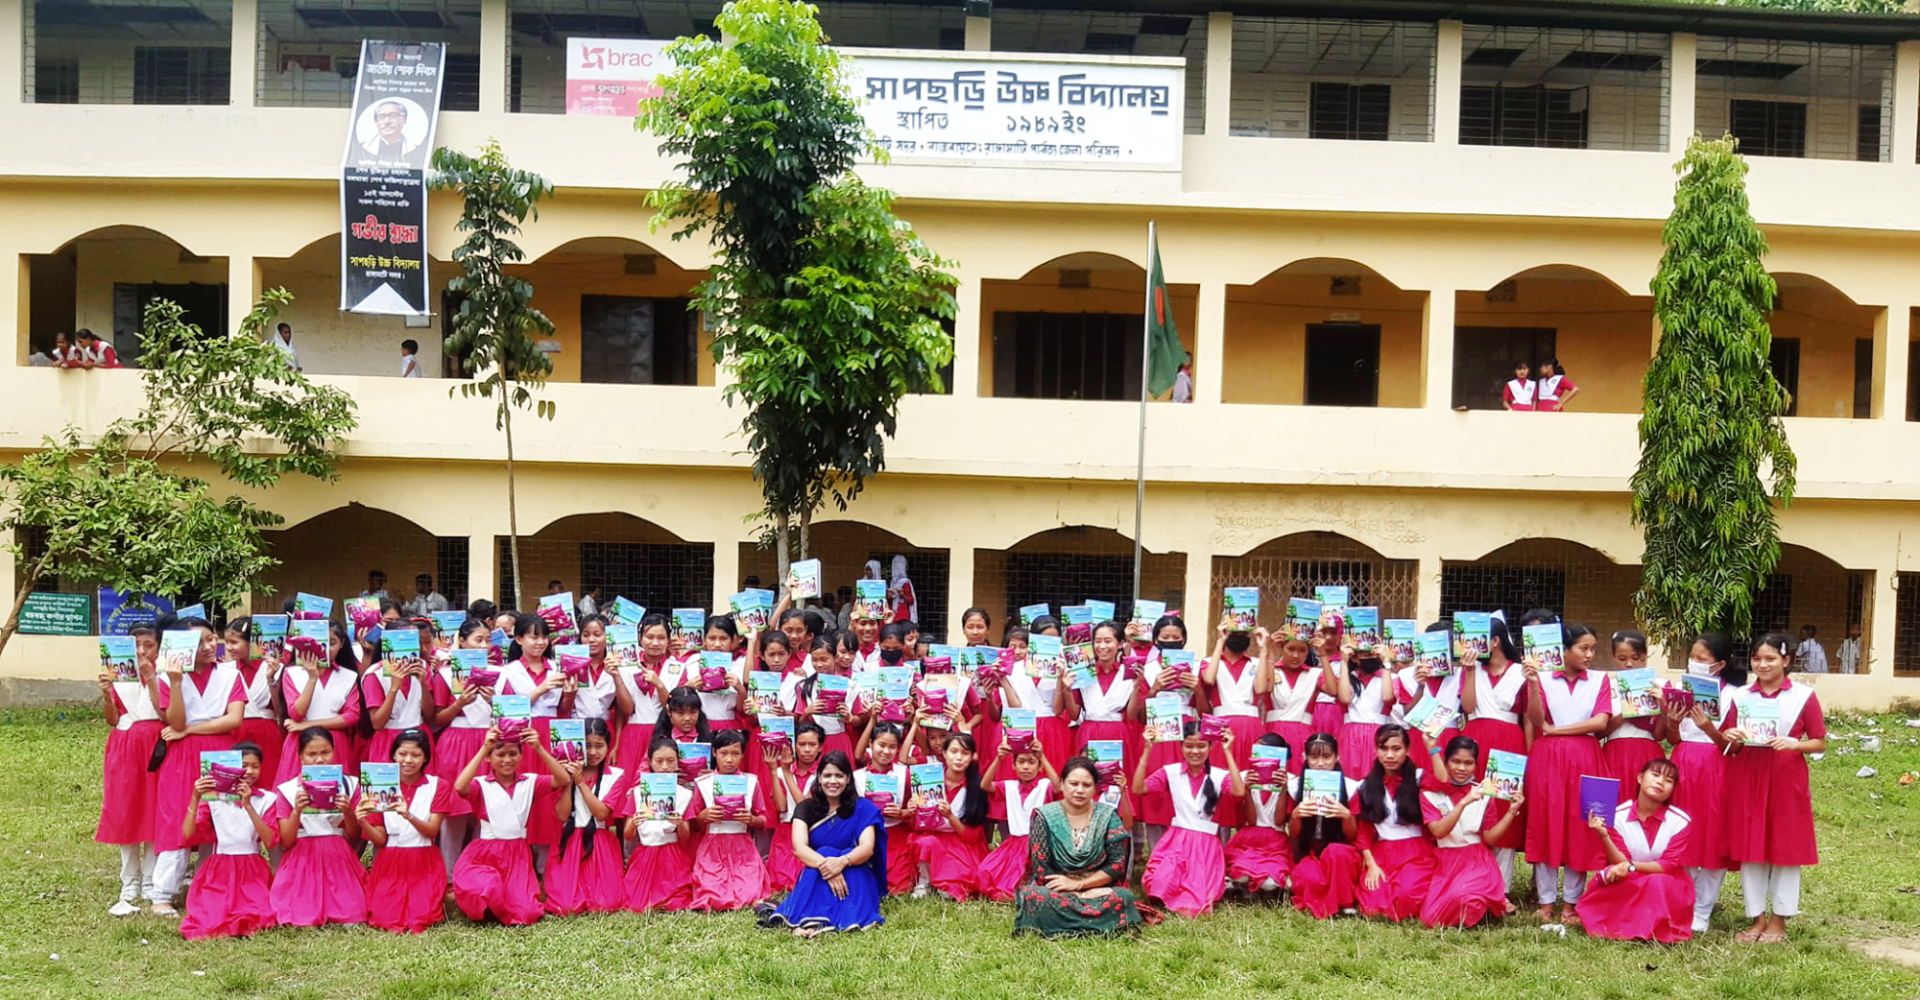 Wreetu Health and Wellbeing Foundation (Wreetu) – providing access to menstrual health education and affordable period products for girls and women in Bangladesh